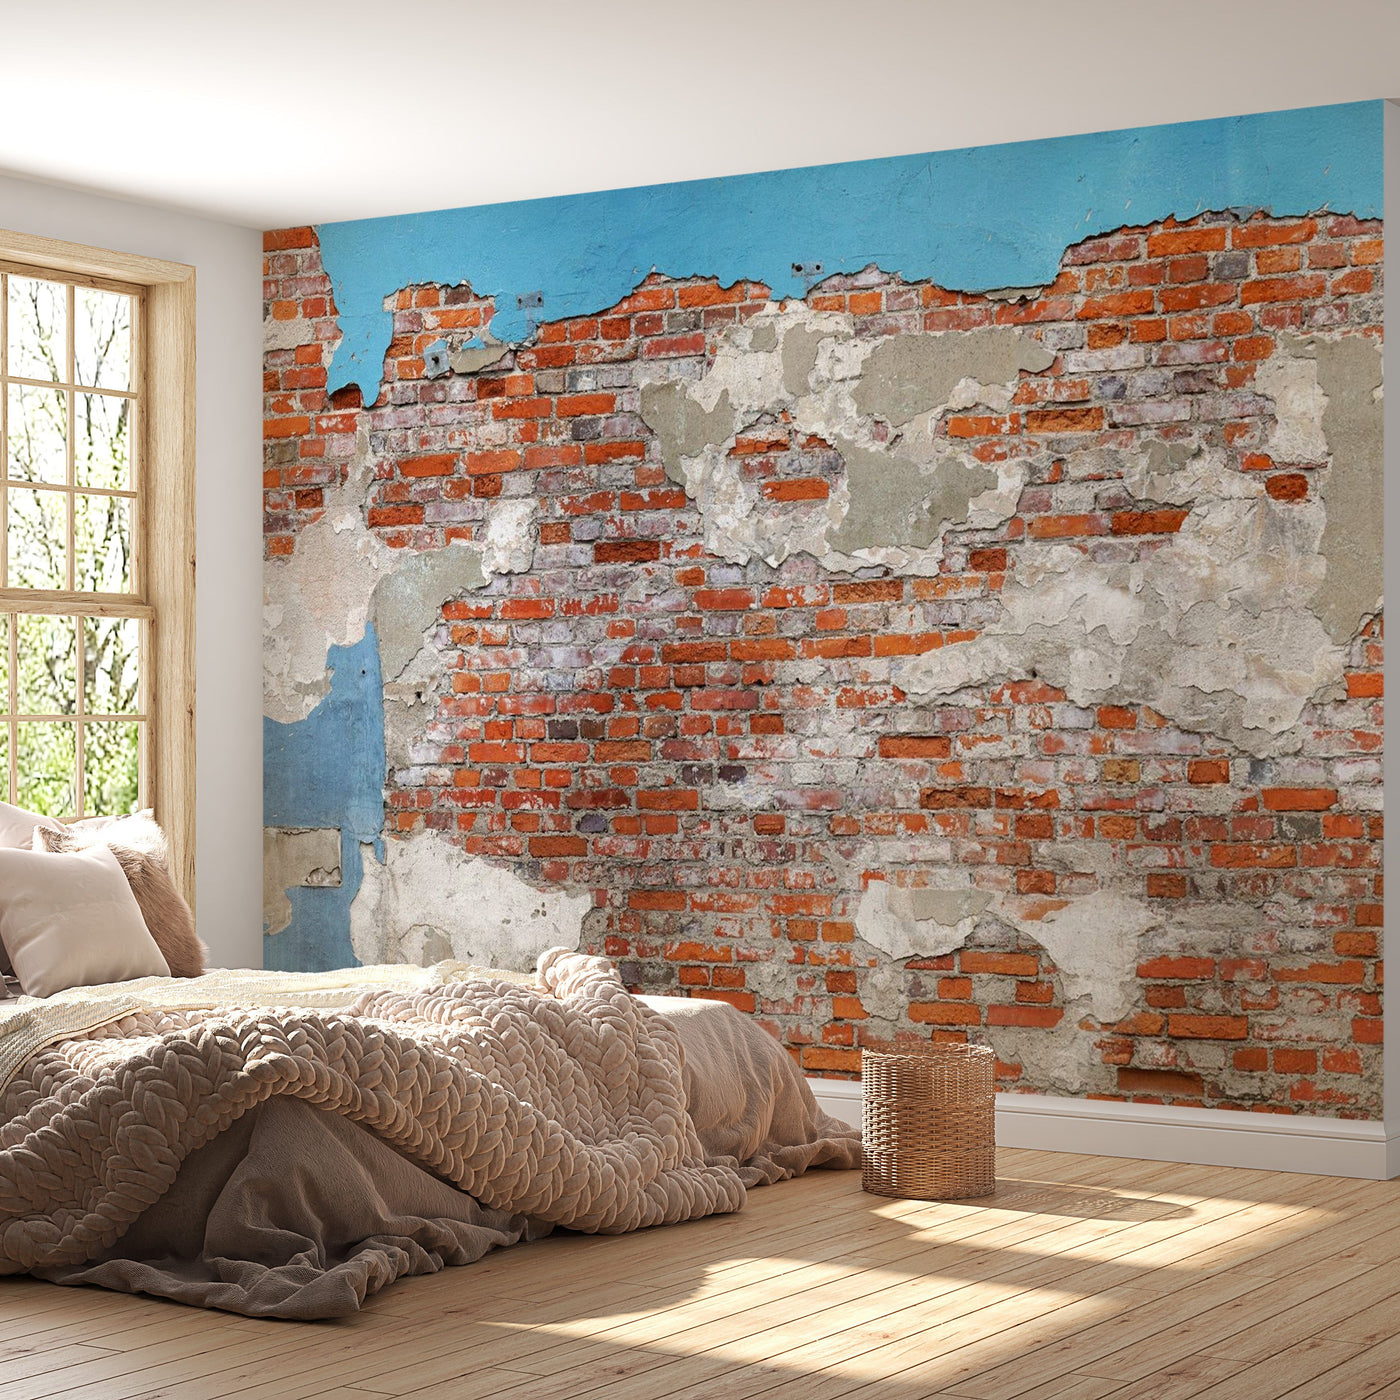 Peel & Stick Wall Mural - Brick Wall With Blue Plaster - Removable Wall Decals